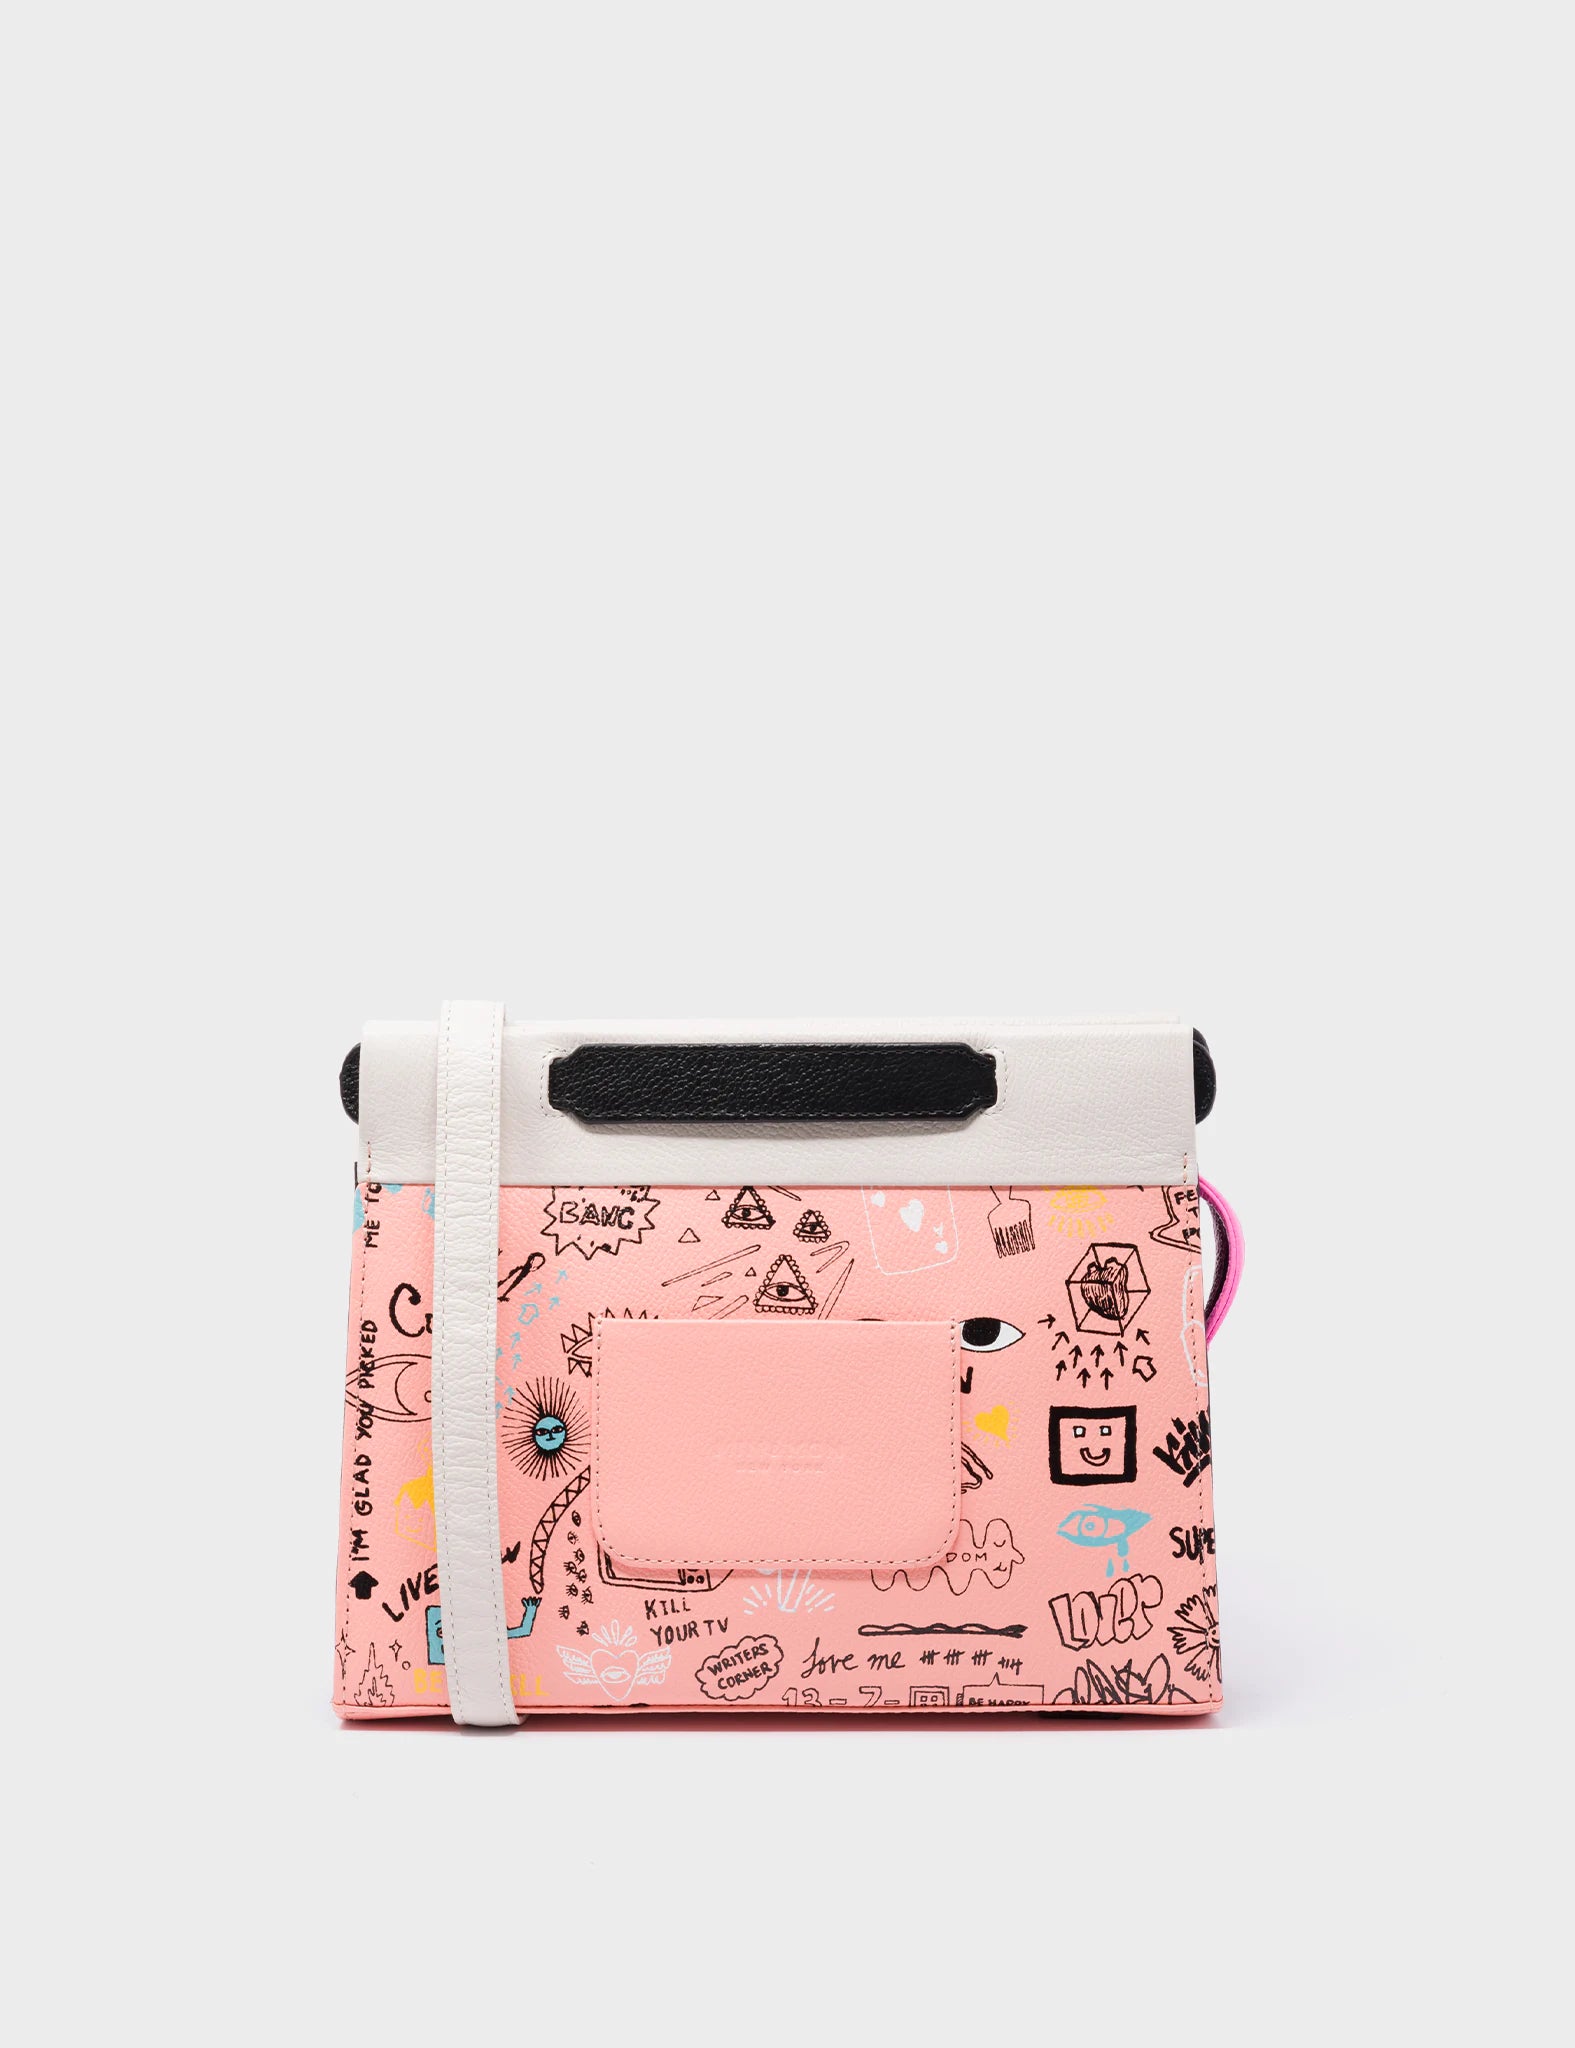 Vali Crossbody Small Rosa Leather Bag - Urban Doodles Print and Eyes Applique - Back View